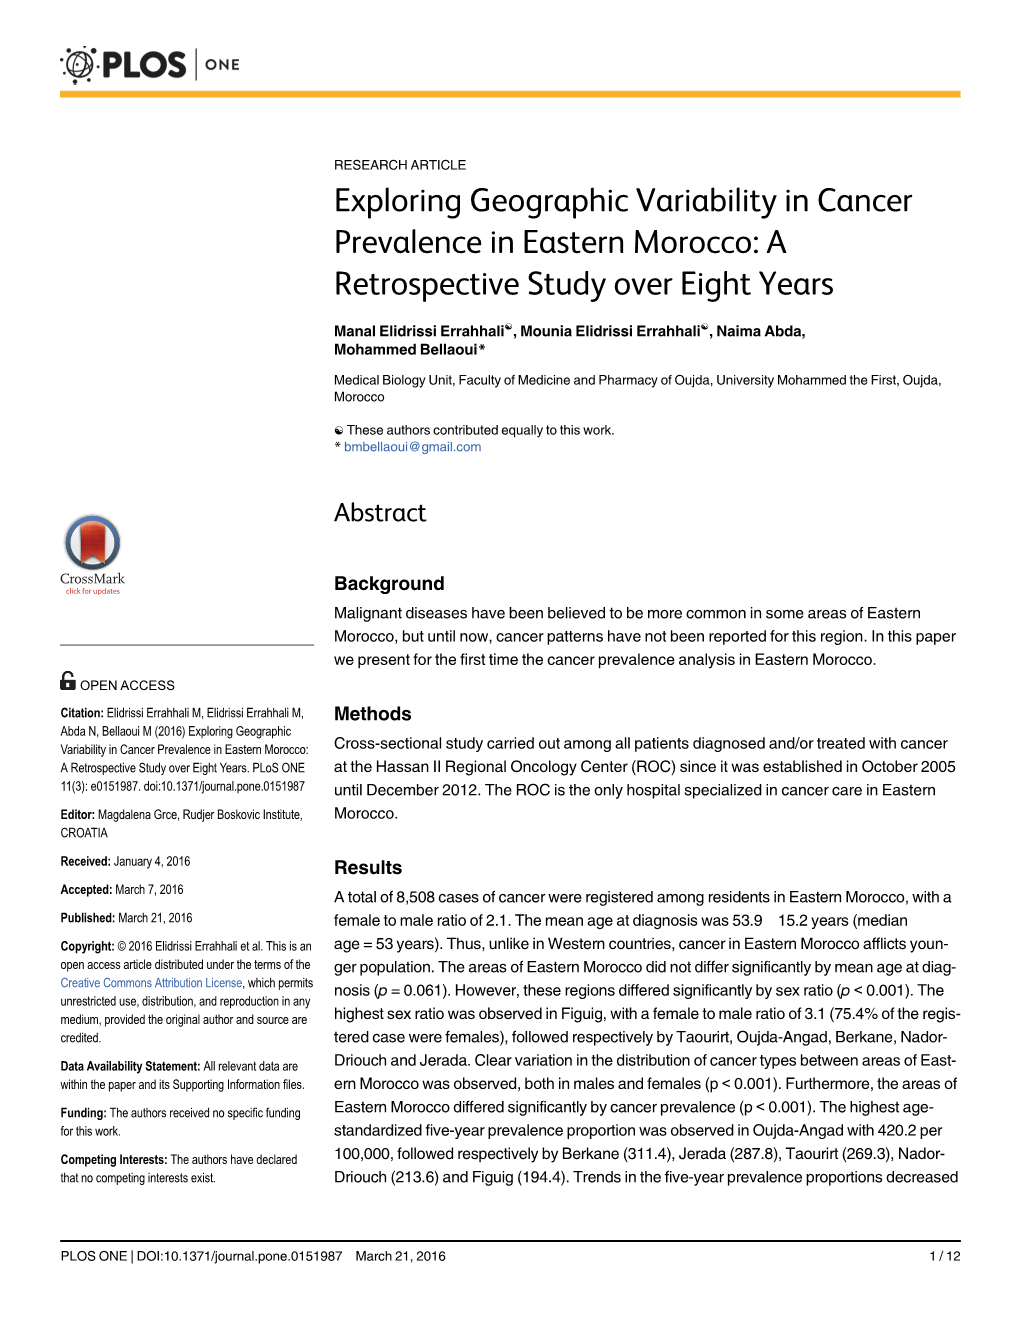 Exploring Geographic Variability in Cancer Prevalence in Eastern Morocco: a Retrospective Study Over Eight Years